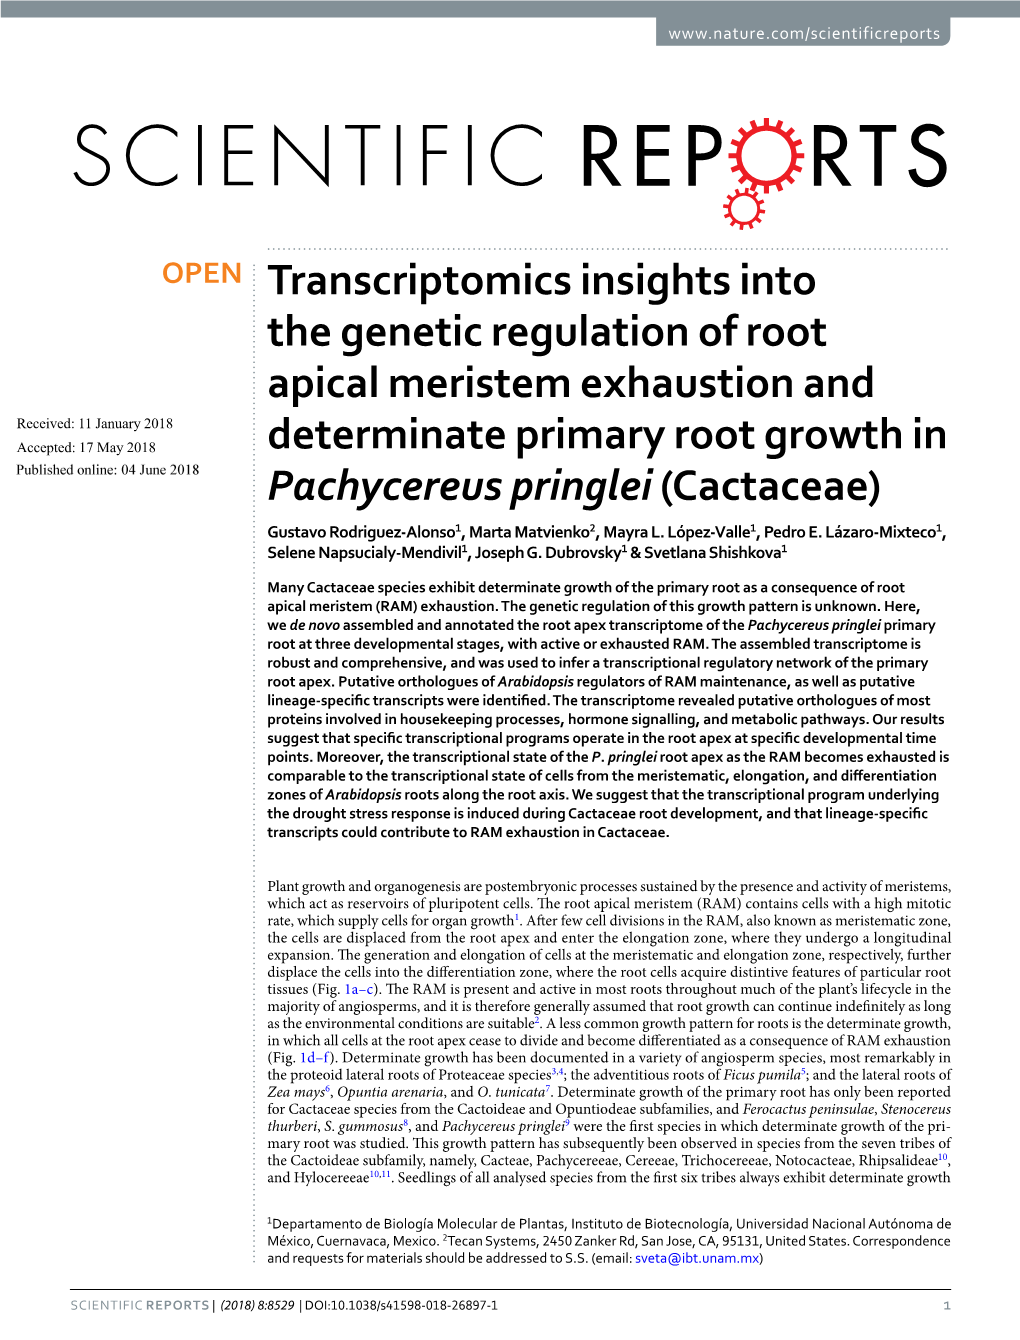 Transcriptomics Insights Into the Genetic Regulation of Root Apical